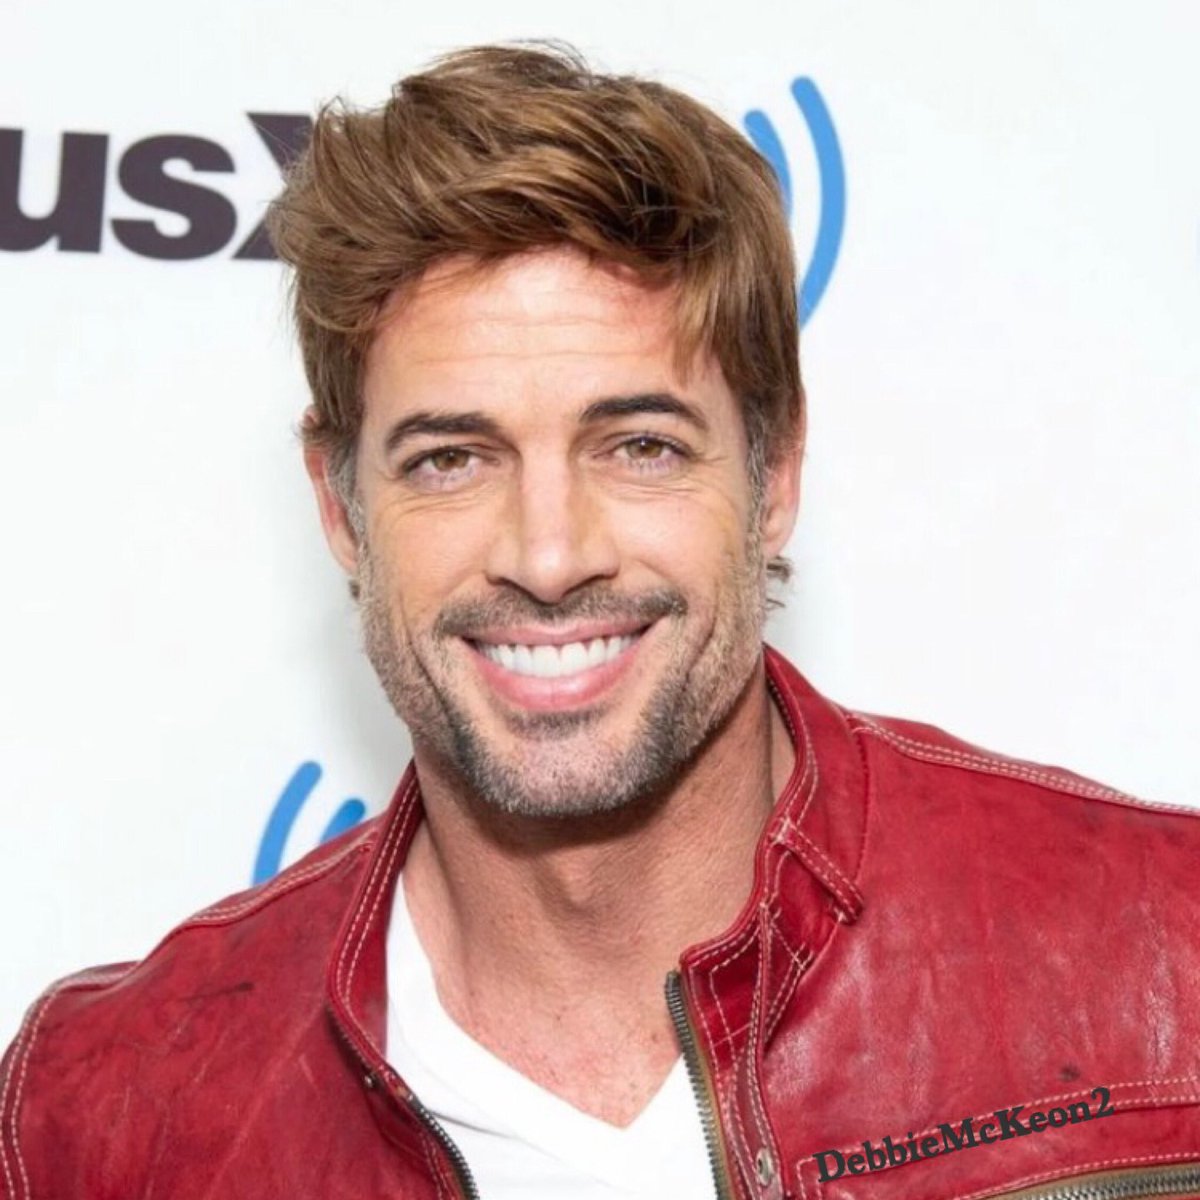 #TBThursday @willylevy29 #willevy #WilliamLevy #cojimar #satorial #LevyFans #WLW #WLWCalifornia #WilliamLevyWorld William promoting #Montrcristo at SiriusXM Studios on April 11, 2023 in NY!